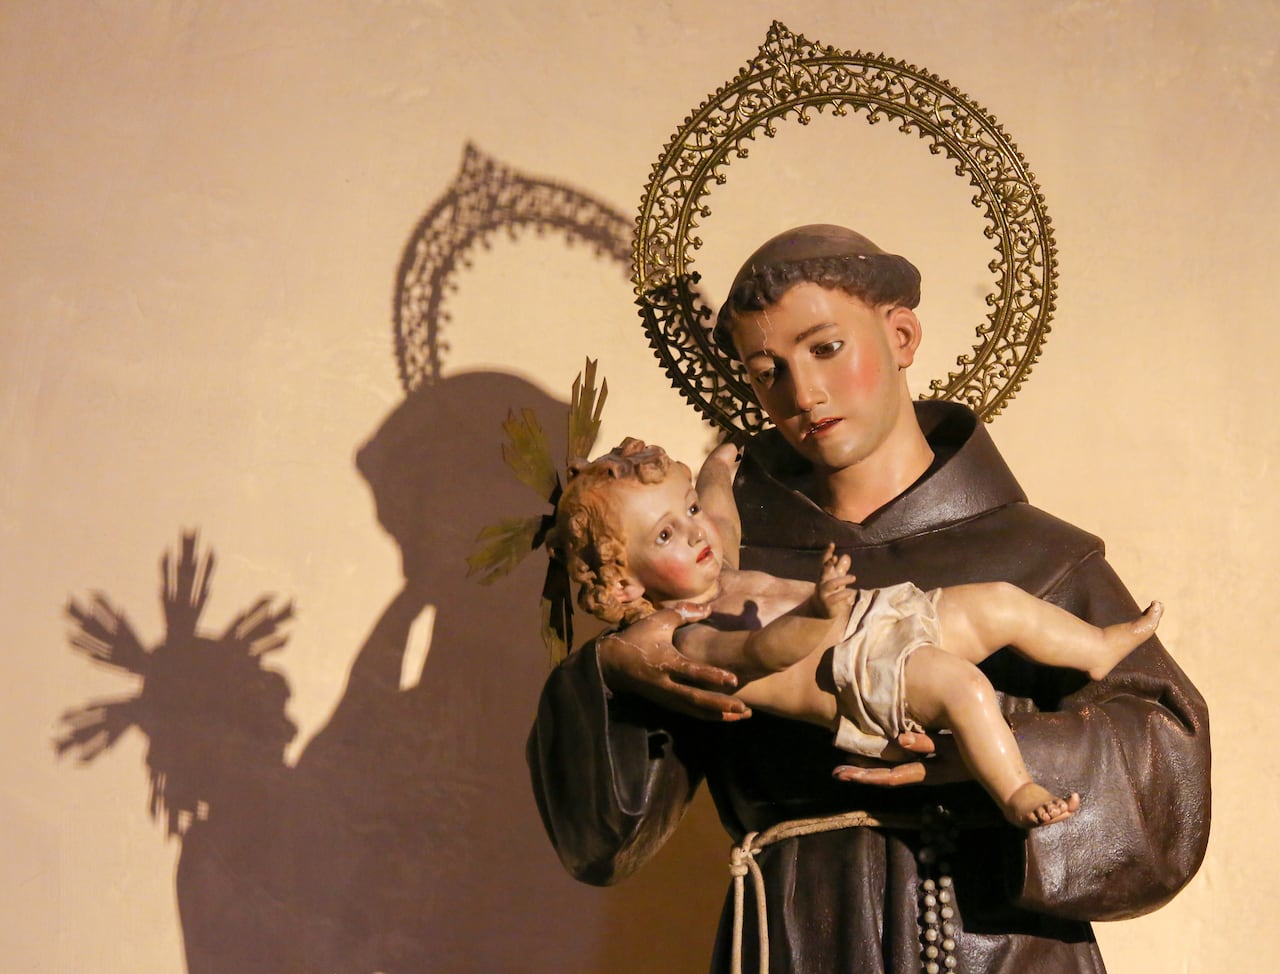 Statue in the Church of Saint Nicholas and Saint Peter Martyr in Valencia, Spain, of Saint Anthony of Padua holding Baby Jesus